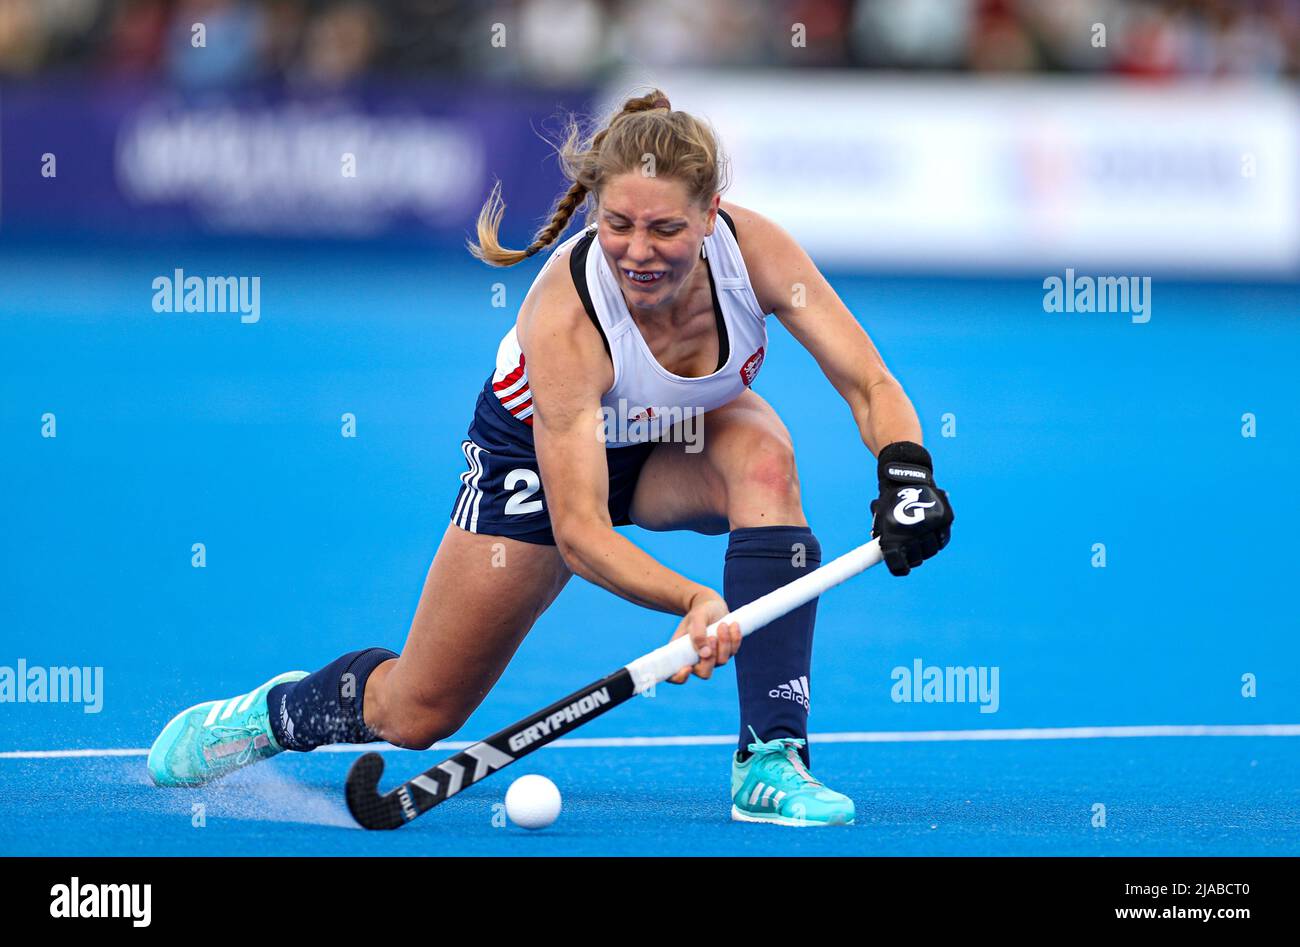 England’s Elizabeth Neal in action during the FIH Hockey Pro League match at Lee Valley, London. Picture date: Sunday May 29, 2022. See PA story HOCKEY England Women. Photo credit should read: Bradley Collyer/PA Wire. RESTRICTIONS: Use subject to restrictions. Editorial use only, no commercial use without prior consent from rights holder. Stock Photo